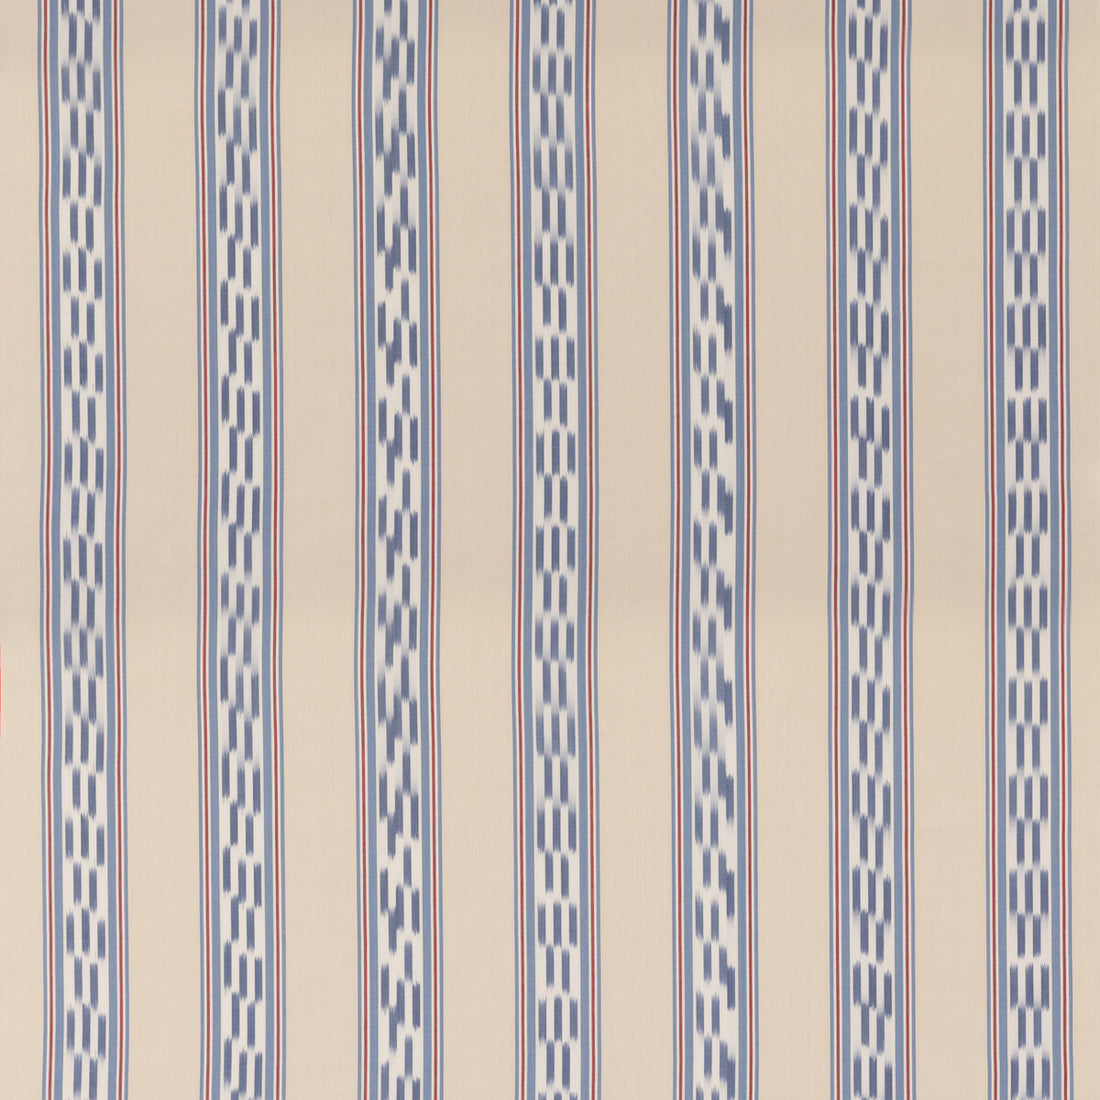 Breezy Stripe fabric in blue/red color - pattern FD819.G103.0 - by Mulberry in the Westerly Stripes collection